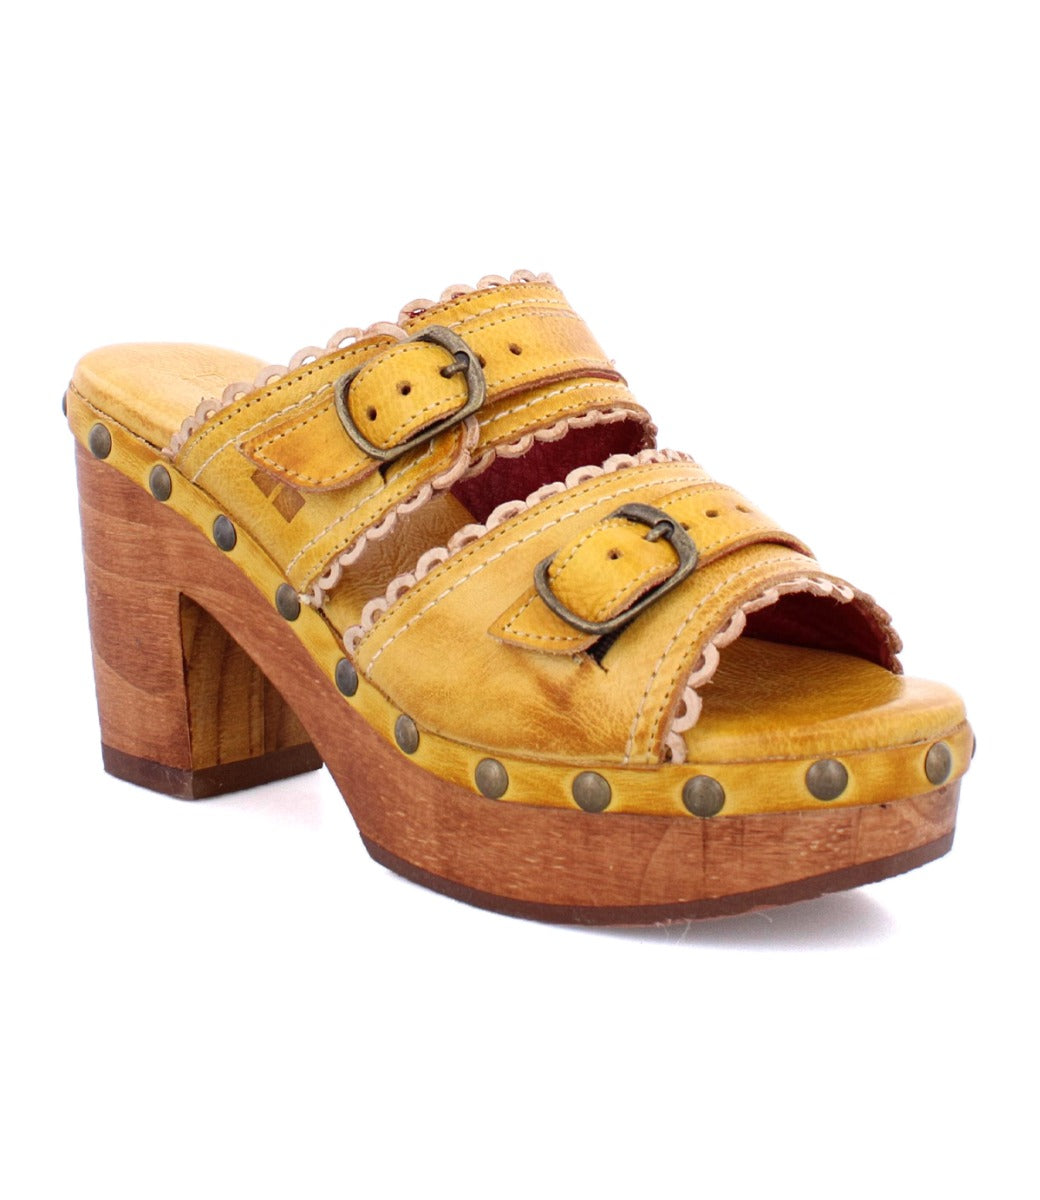 A women's yellow Poly sandal with a wooden heel, made by Bed Stu.